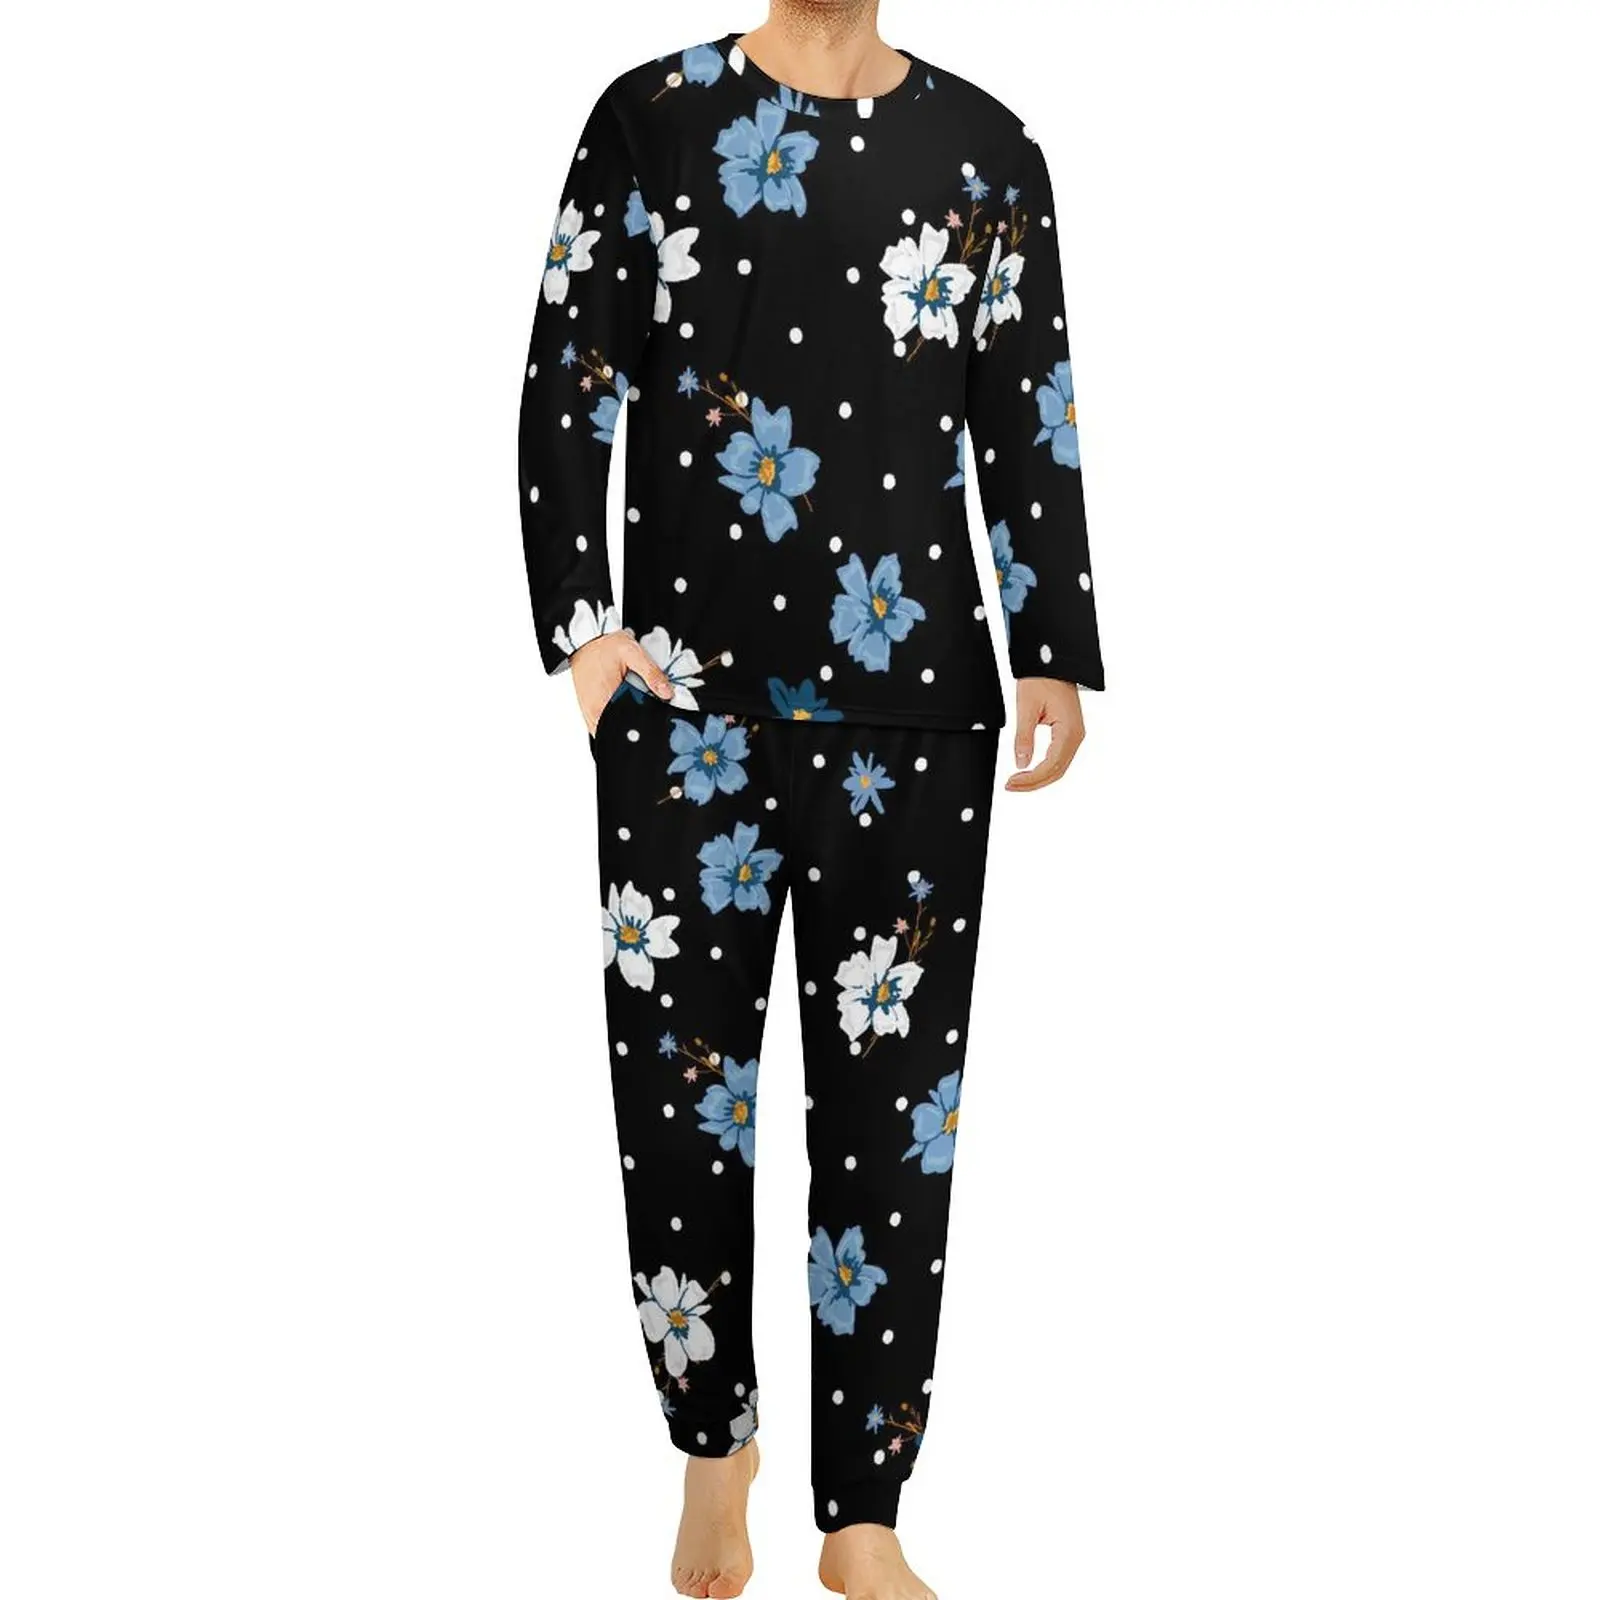 

Blue White Daisies Pajamas Polka Dots Floral Pirnt Bedroom Home Suit 2 Piece Graphic Long Sleeve Trendy Oversize Pajamas Set